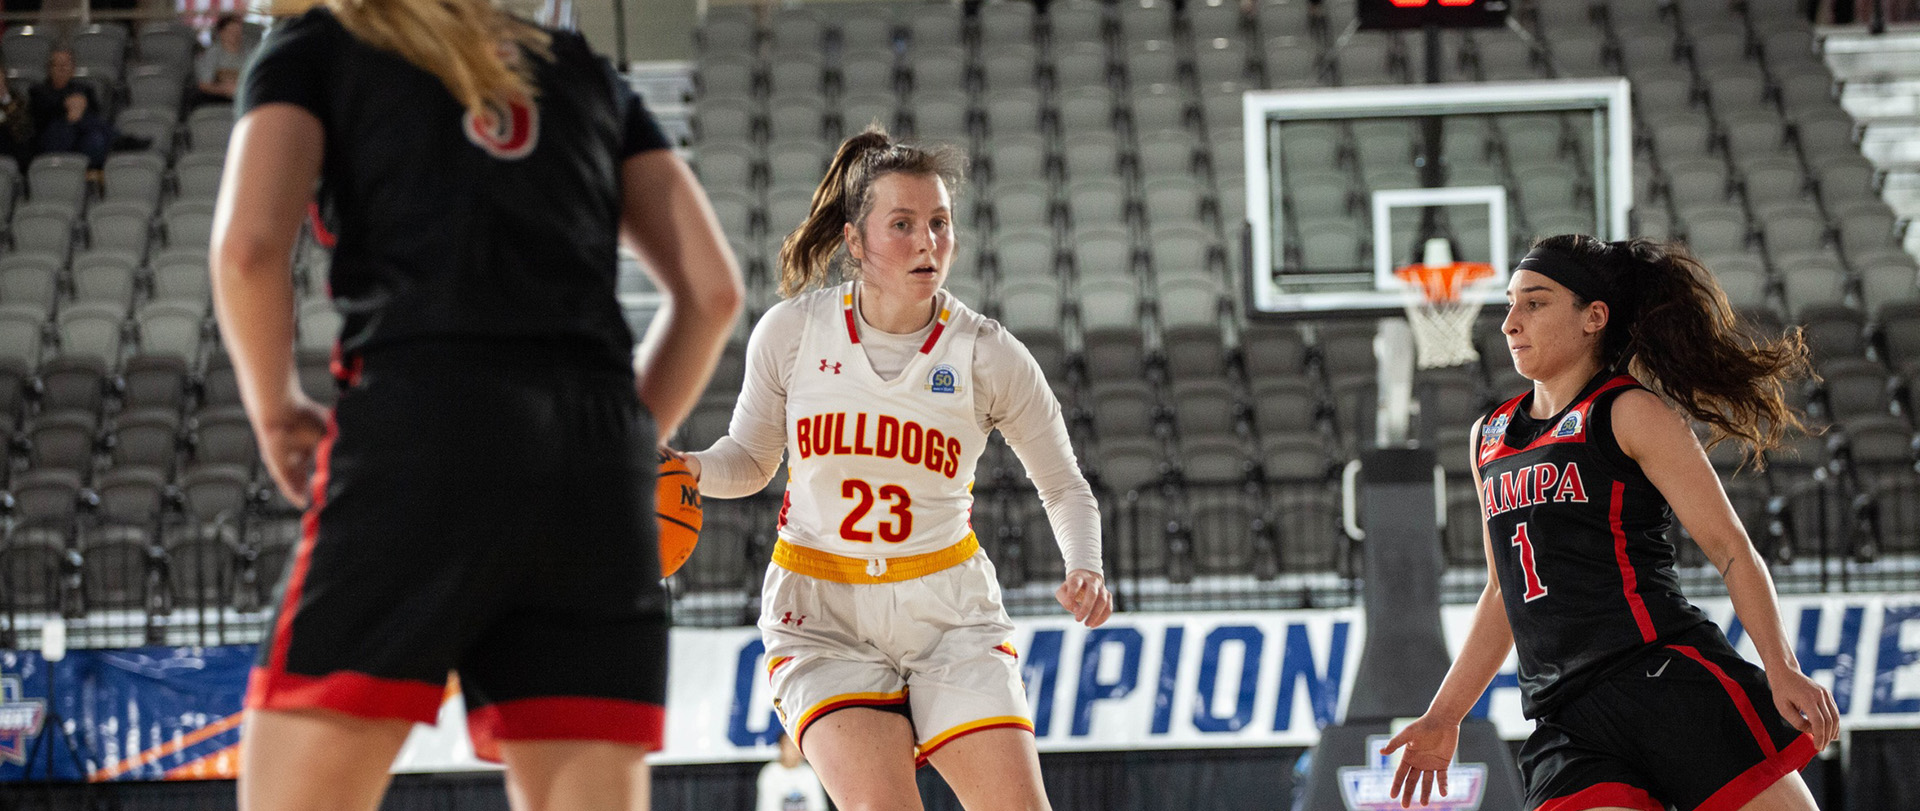 Ferris State women's basketball competing in the sweet sixteen at the NCAA tournament